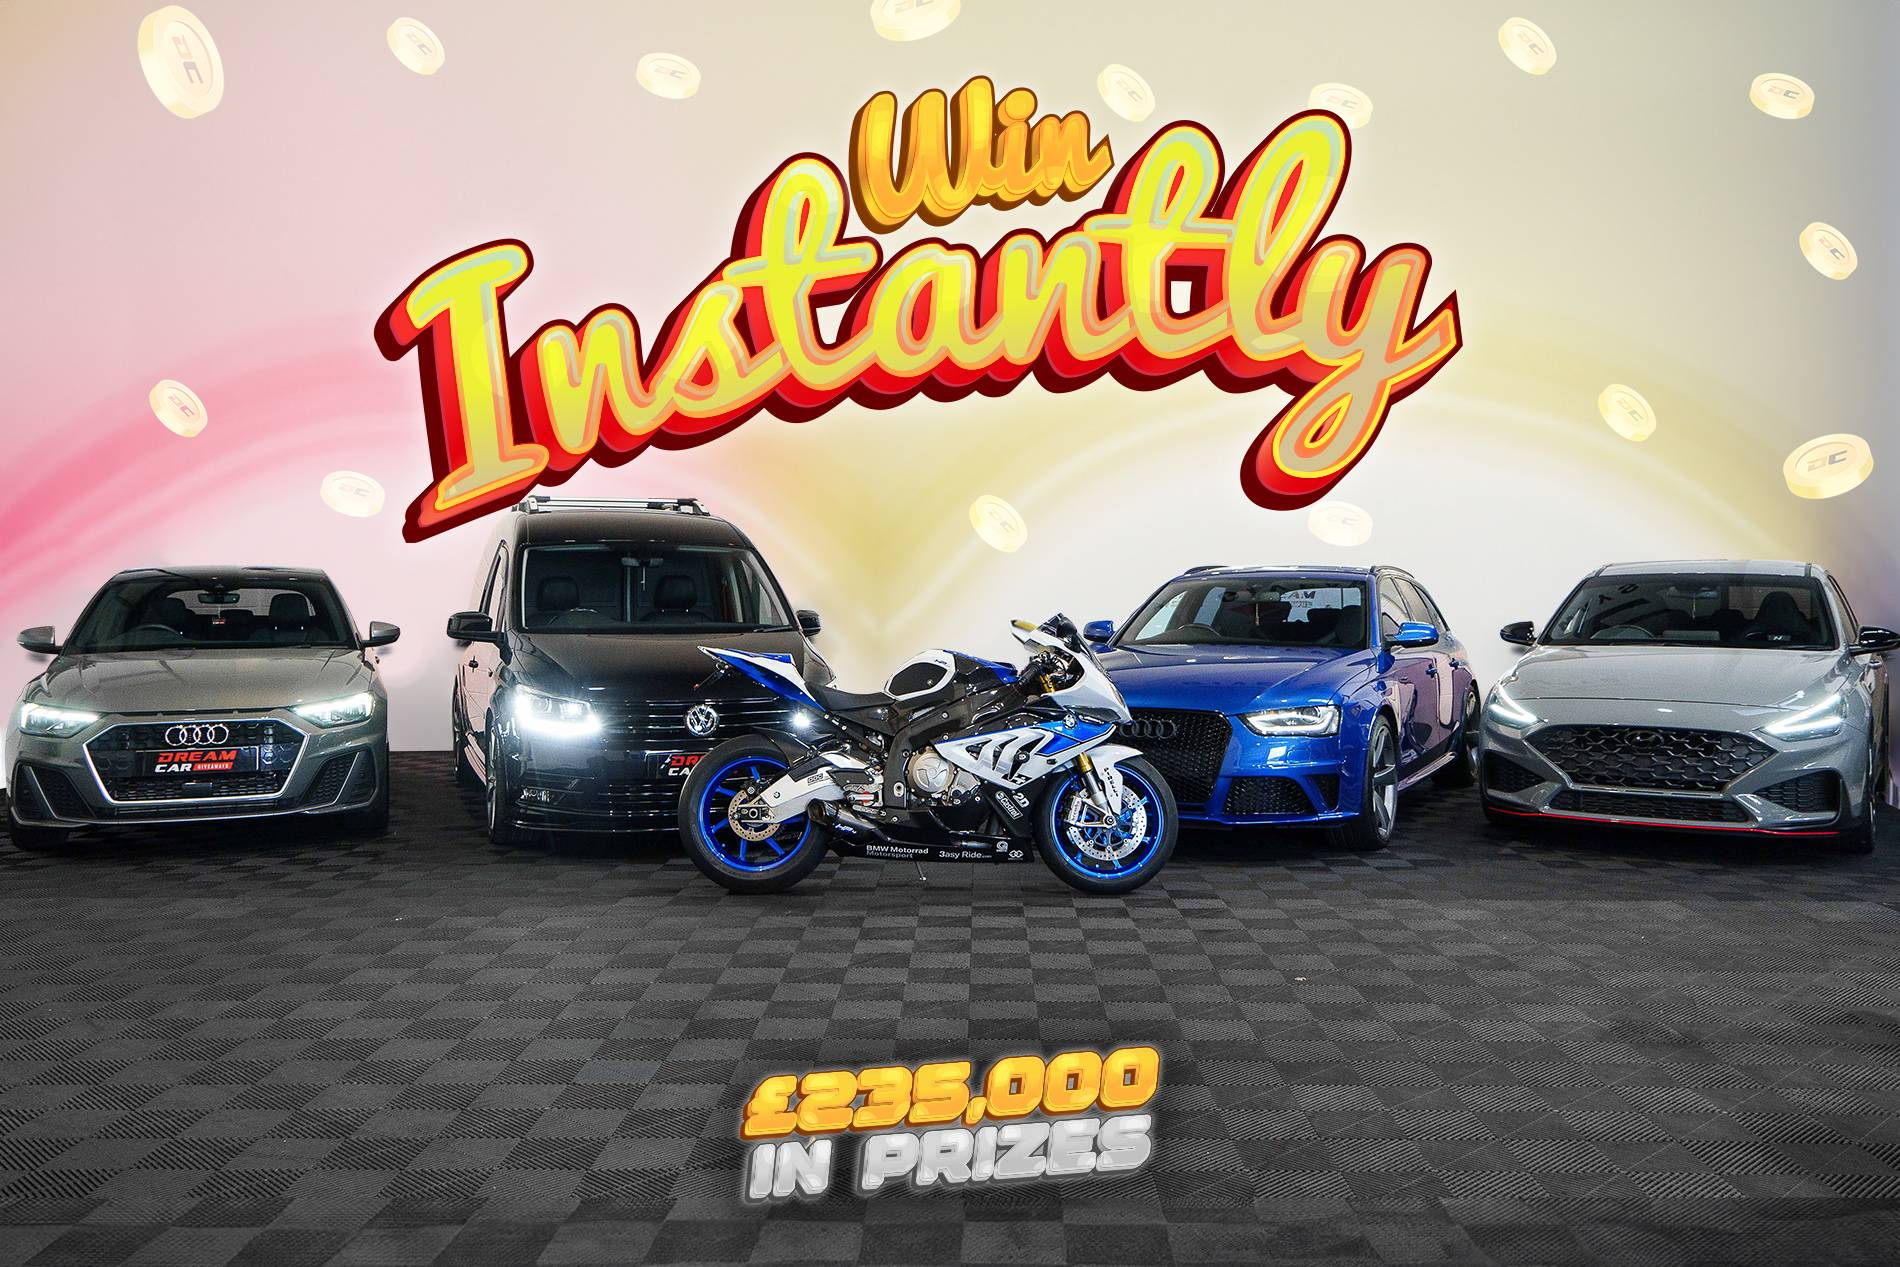 WIN INSTANTLY! 2000 Prizes / 4 Cars + Motorbike & £10,000 End Prize